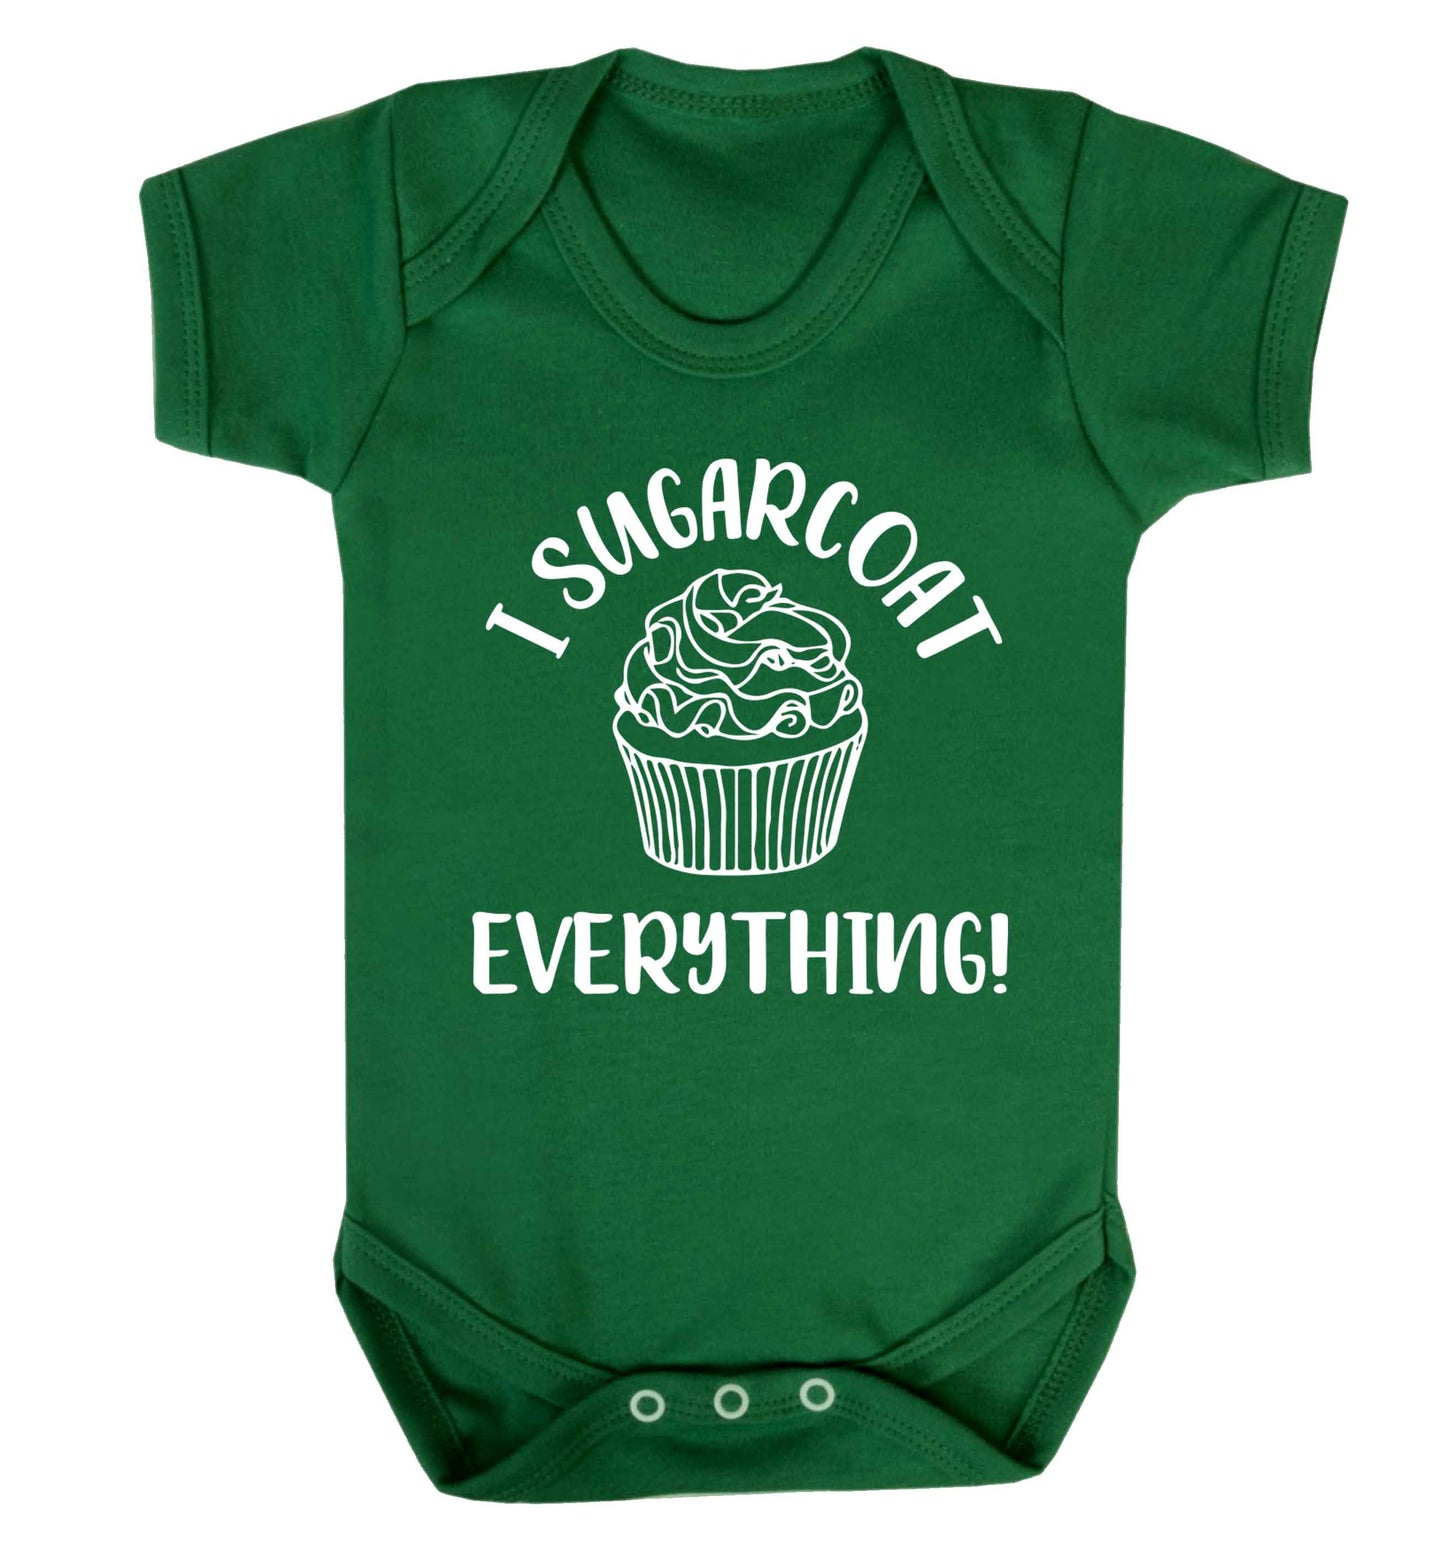 I sugarcoat everything Baby Vest green 18-24 months